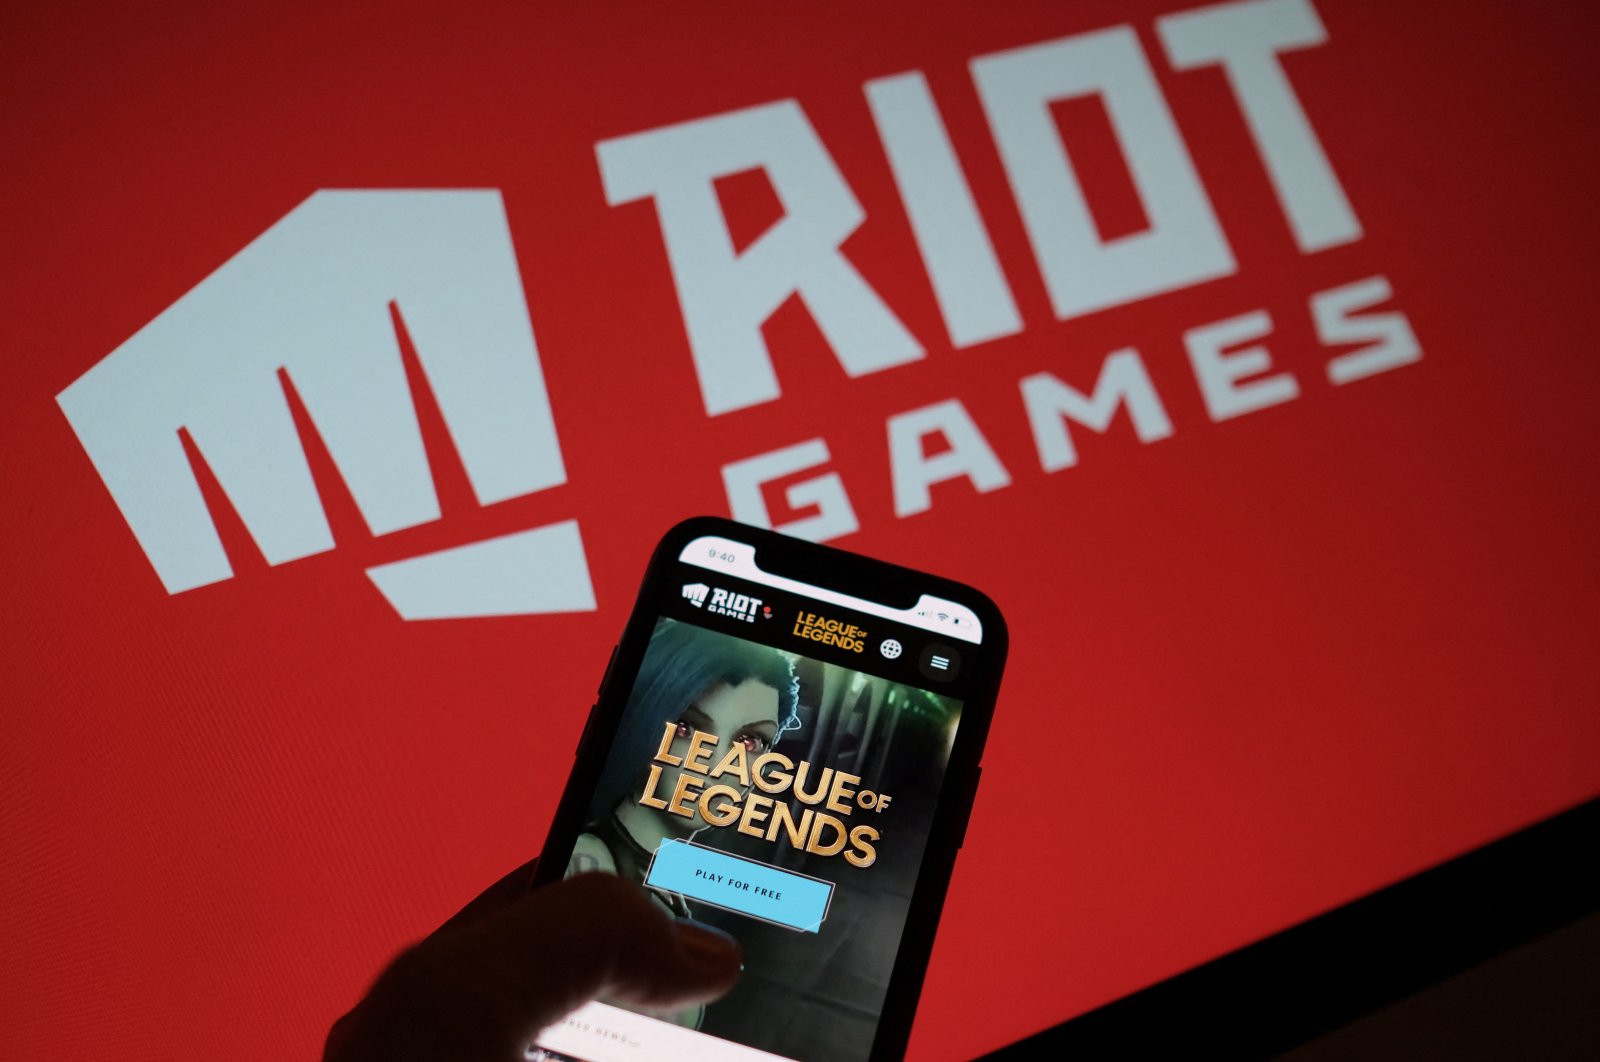 The game League of Legends is seen on a smartphone screen in front of the Riot Games logo in Los Angeles, California, U.S., Dec. 27, 2021. (AFP Photo)